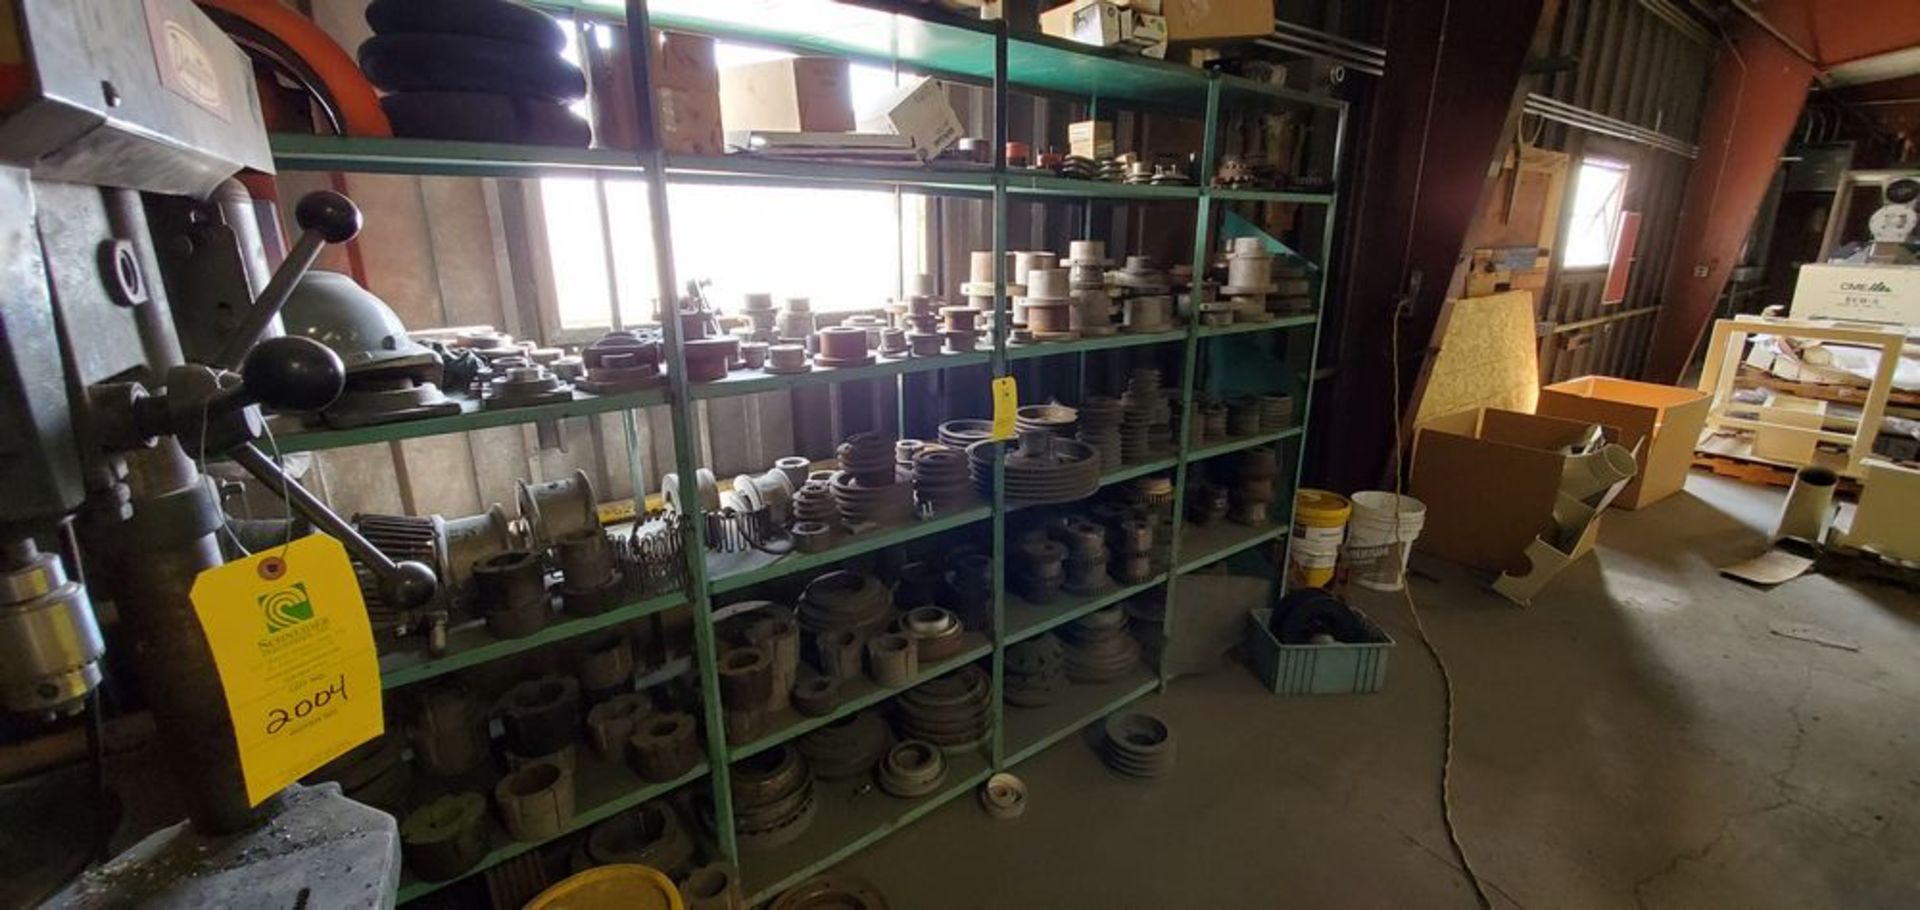 Located in Canon City, CO -- Racking with approximately 300 Drive and coupling parts both new and - Image 2 of 2